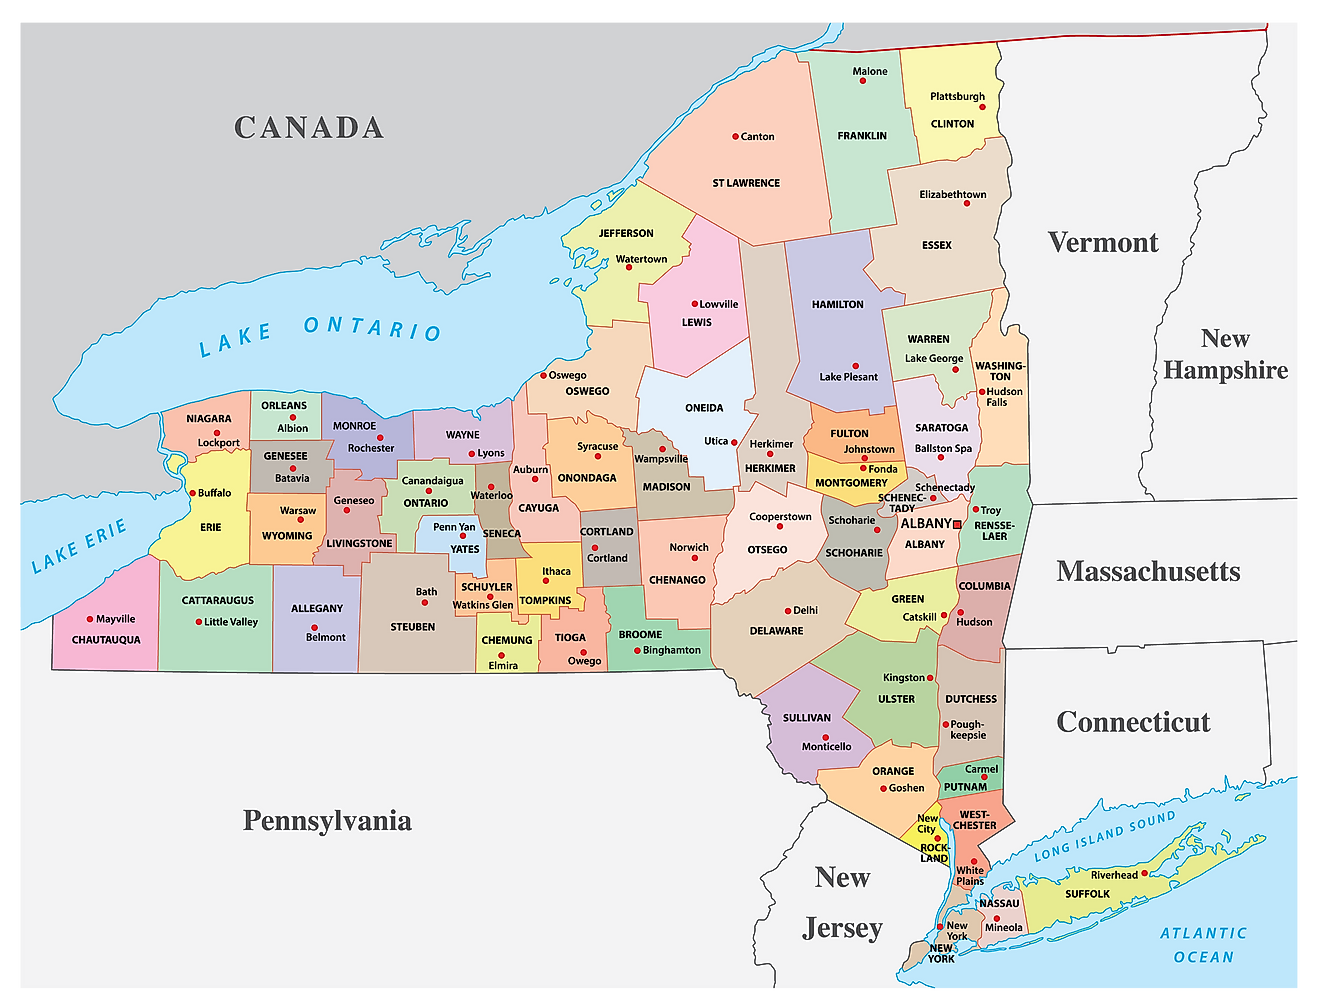 Administrative Map of New York showing its 62 counties and the capital city - Albany